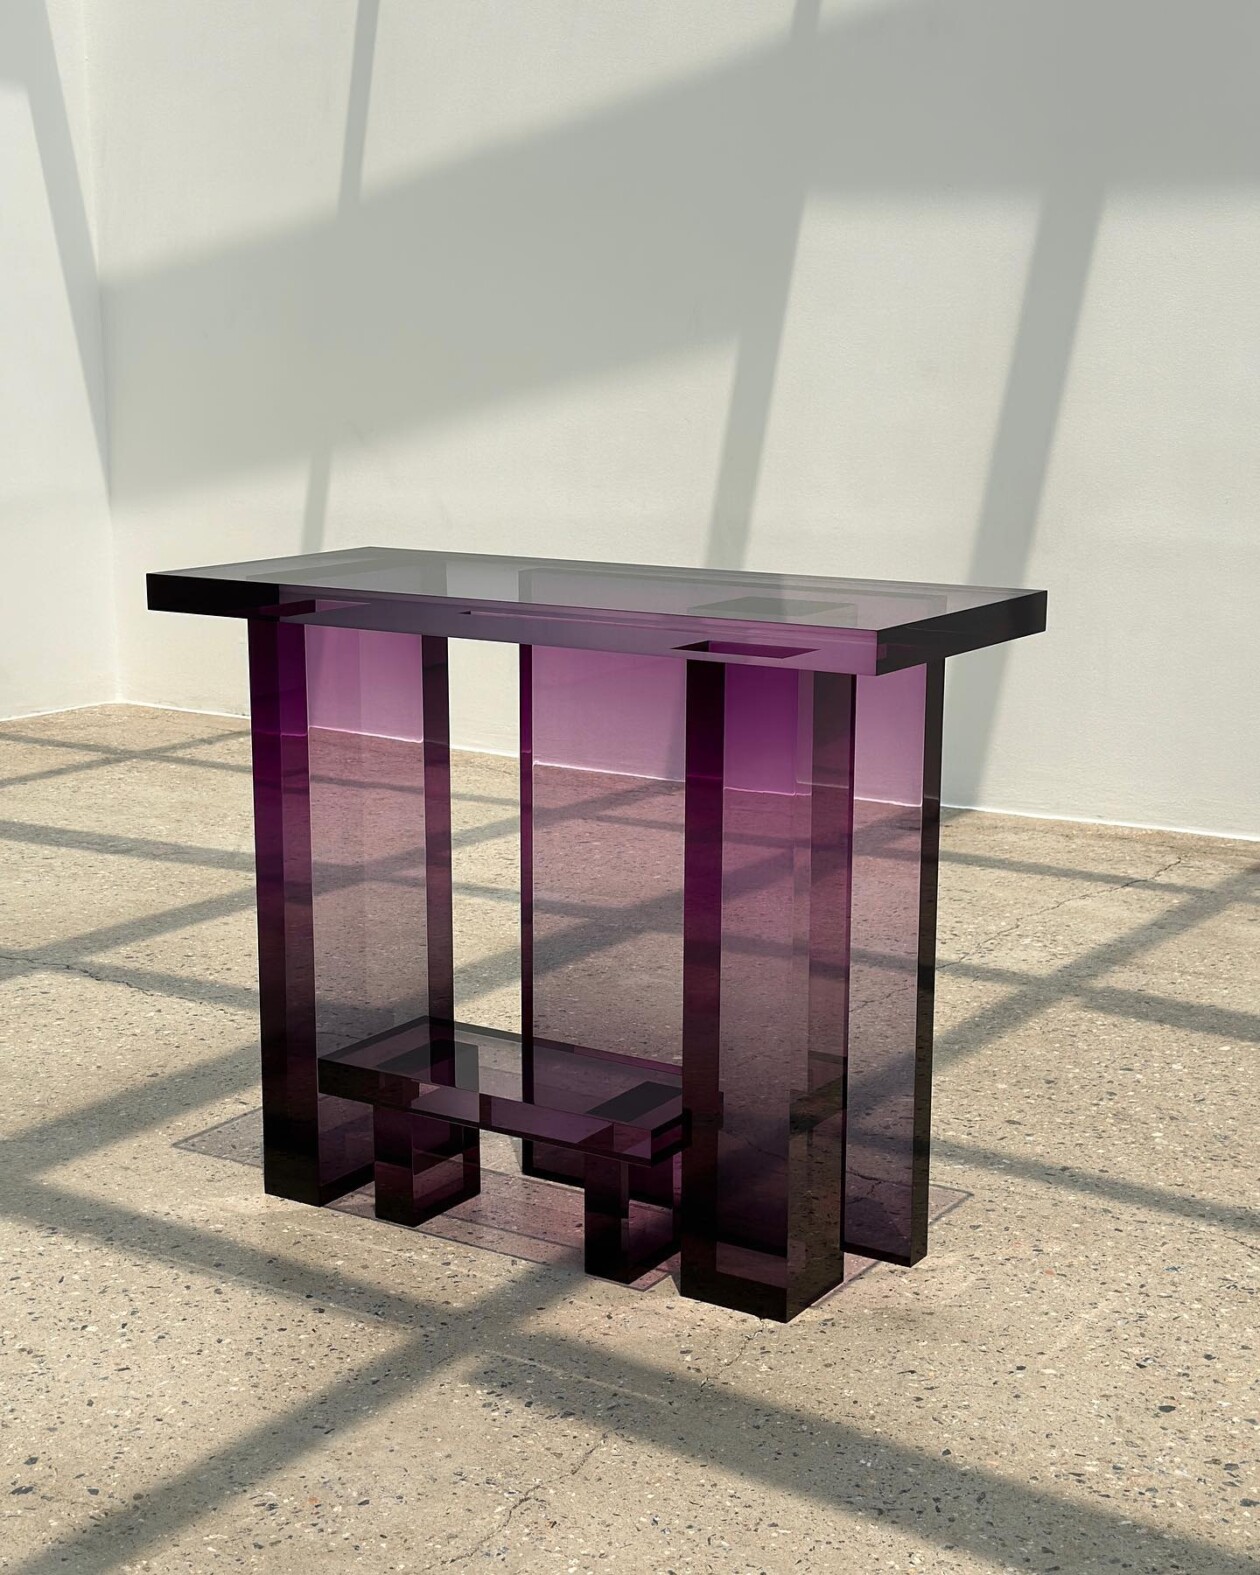 Gorgeous Sculptural Furniture Made Of Gradient Acrylic By South Korean Artist Saerom Yoon (17)